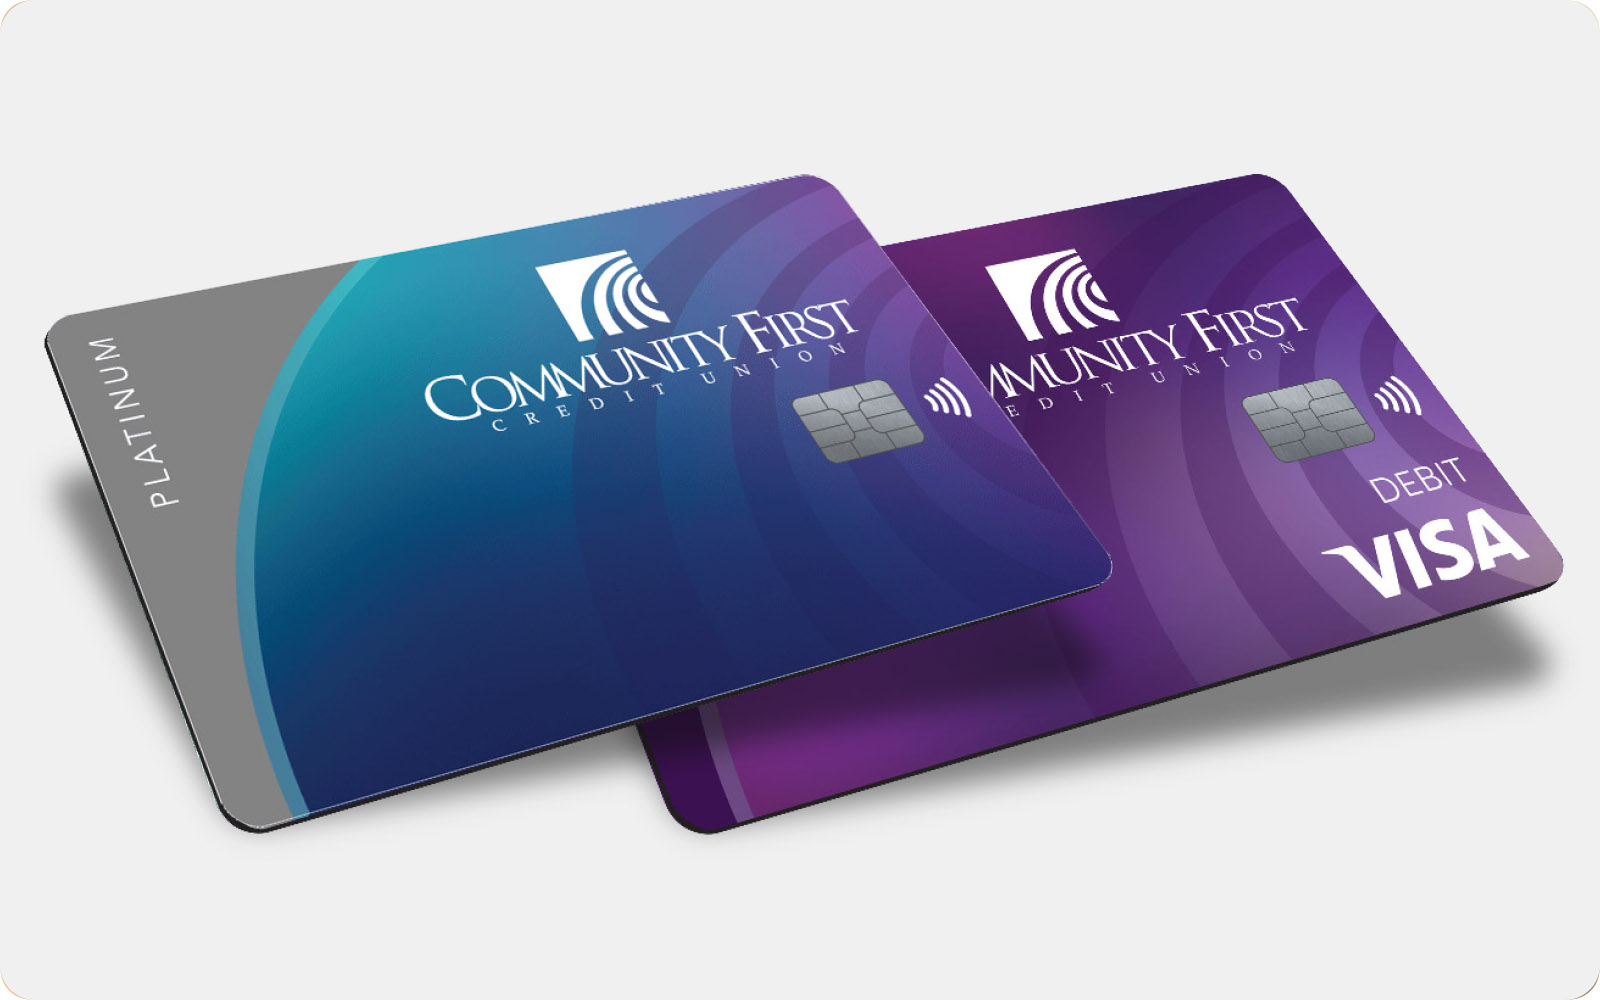 Community First Credit Union Platinum in teal and gray and Visa Debit Card in purple.